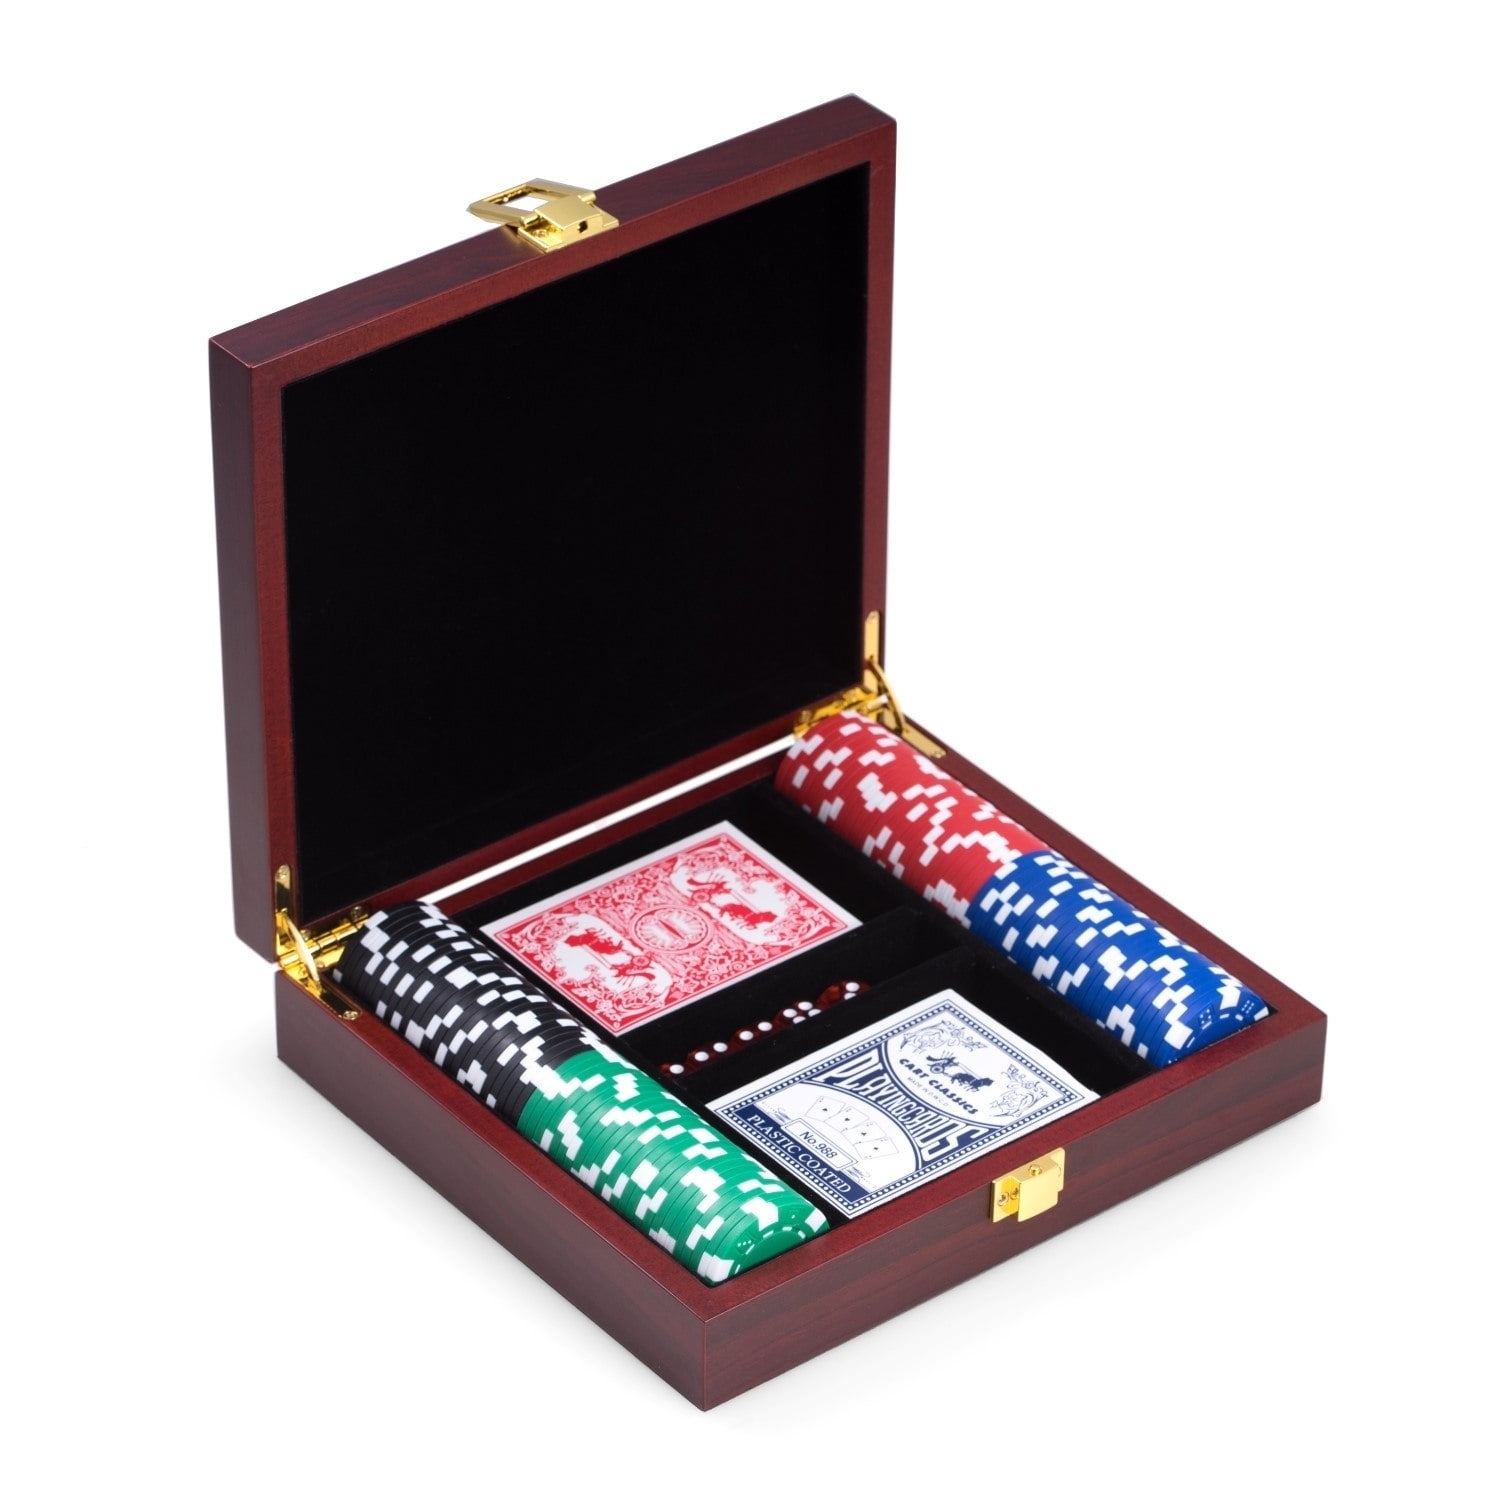 Bey Berk International Bey-Berk International G555 Bey Berk Poker Set with 100 Clay Composite Chips, Rosewood